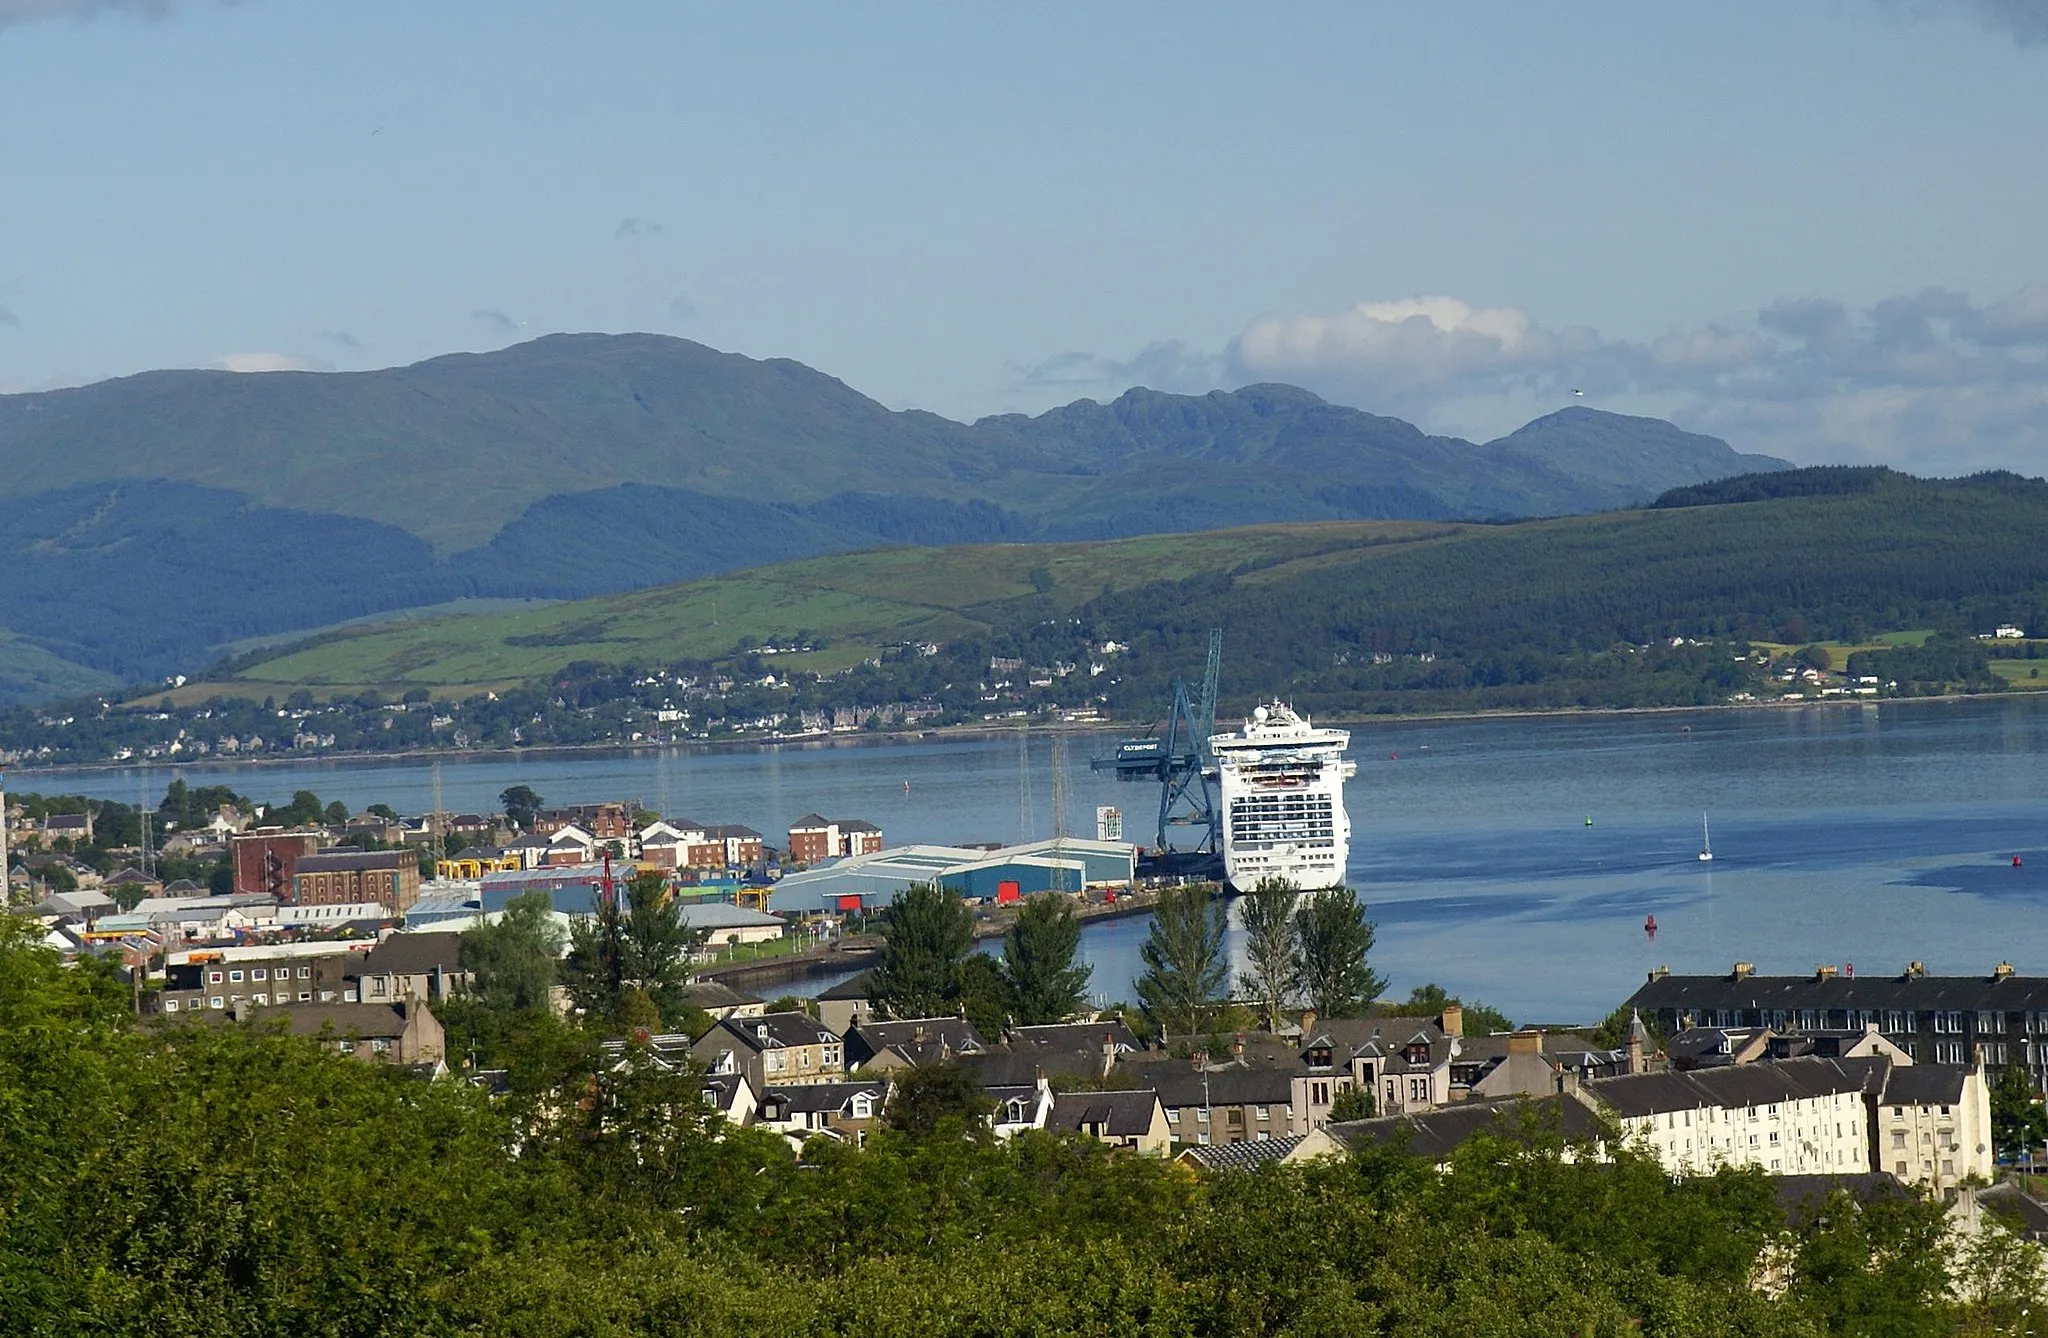 Photo showing: View looking north west over Greenock, Scotland, and across the Firth of Clyde towards Kilcreggan. The Cruise ship Golden Princess is shown docked at Greenock Ocean Terminal.